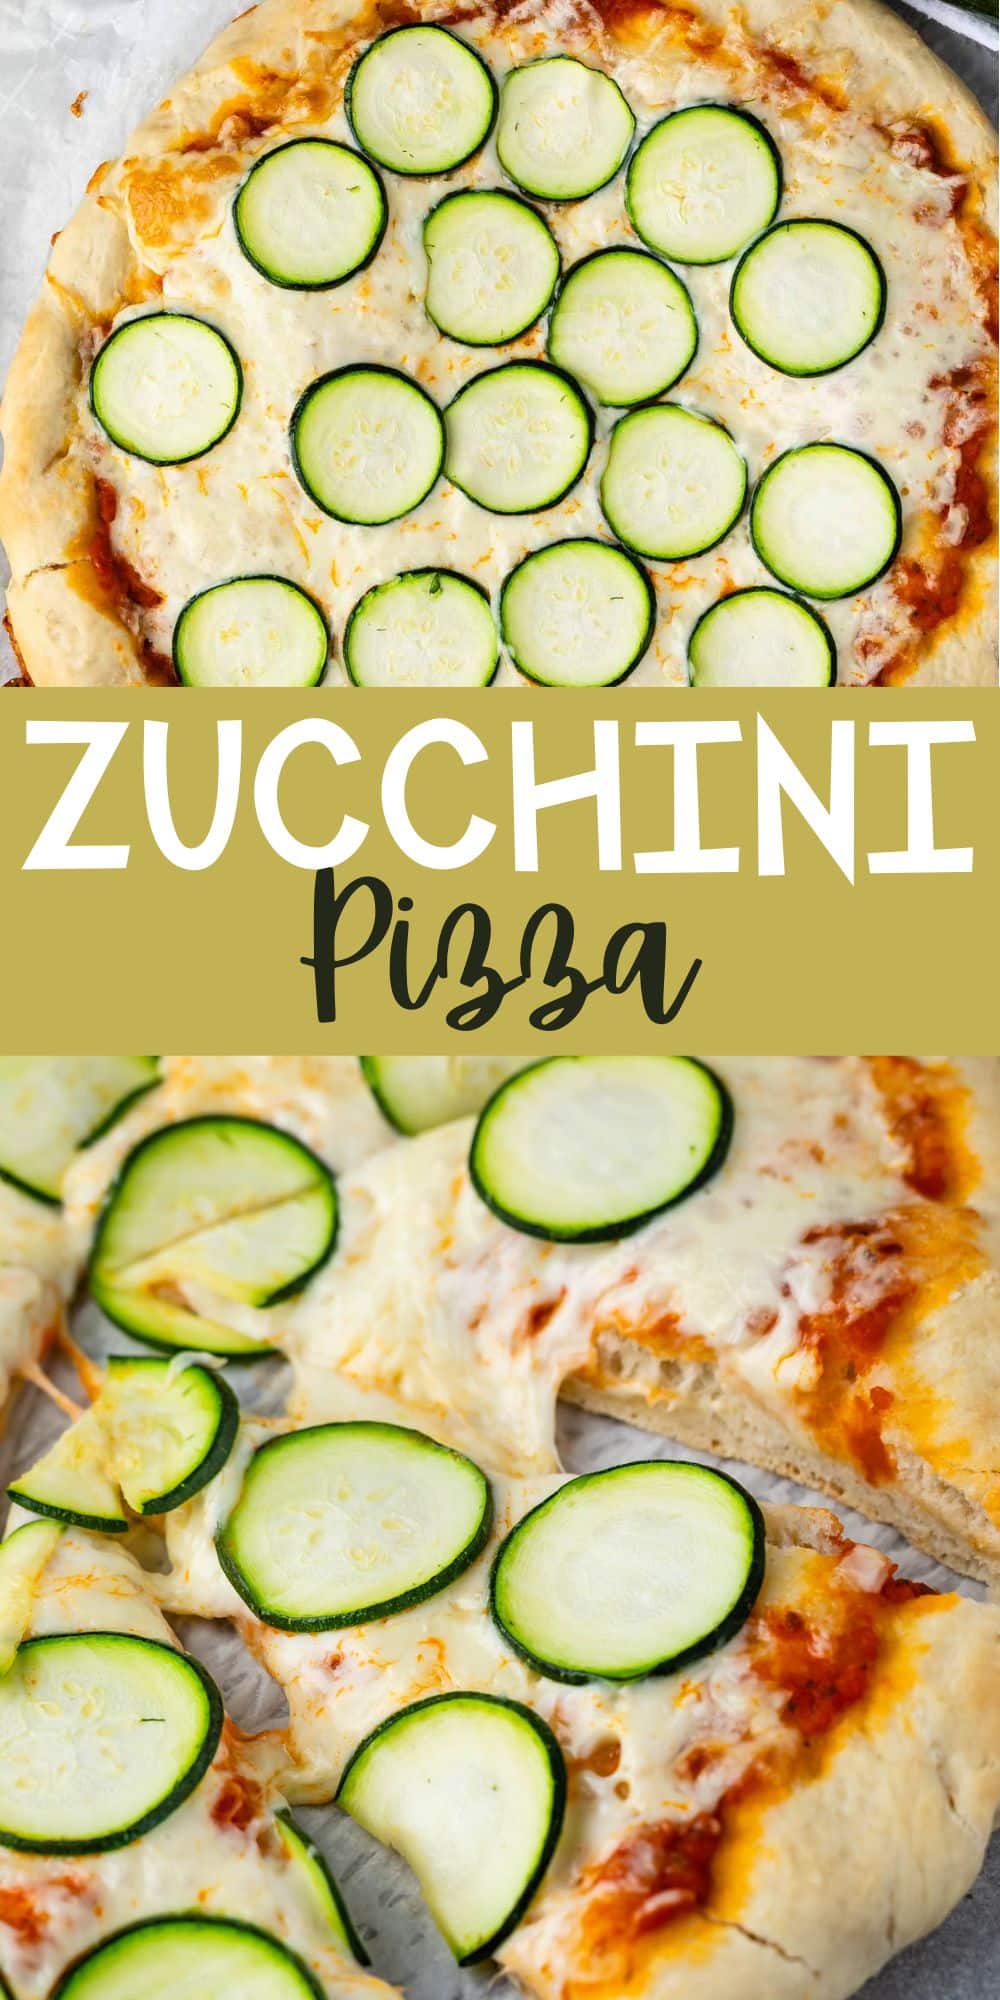 two photos of pizza with sliced zucchinis on top with words on the image.